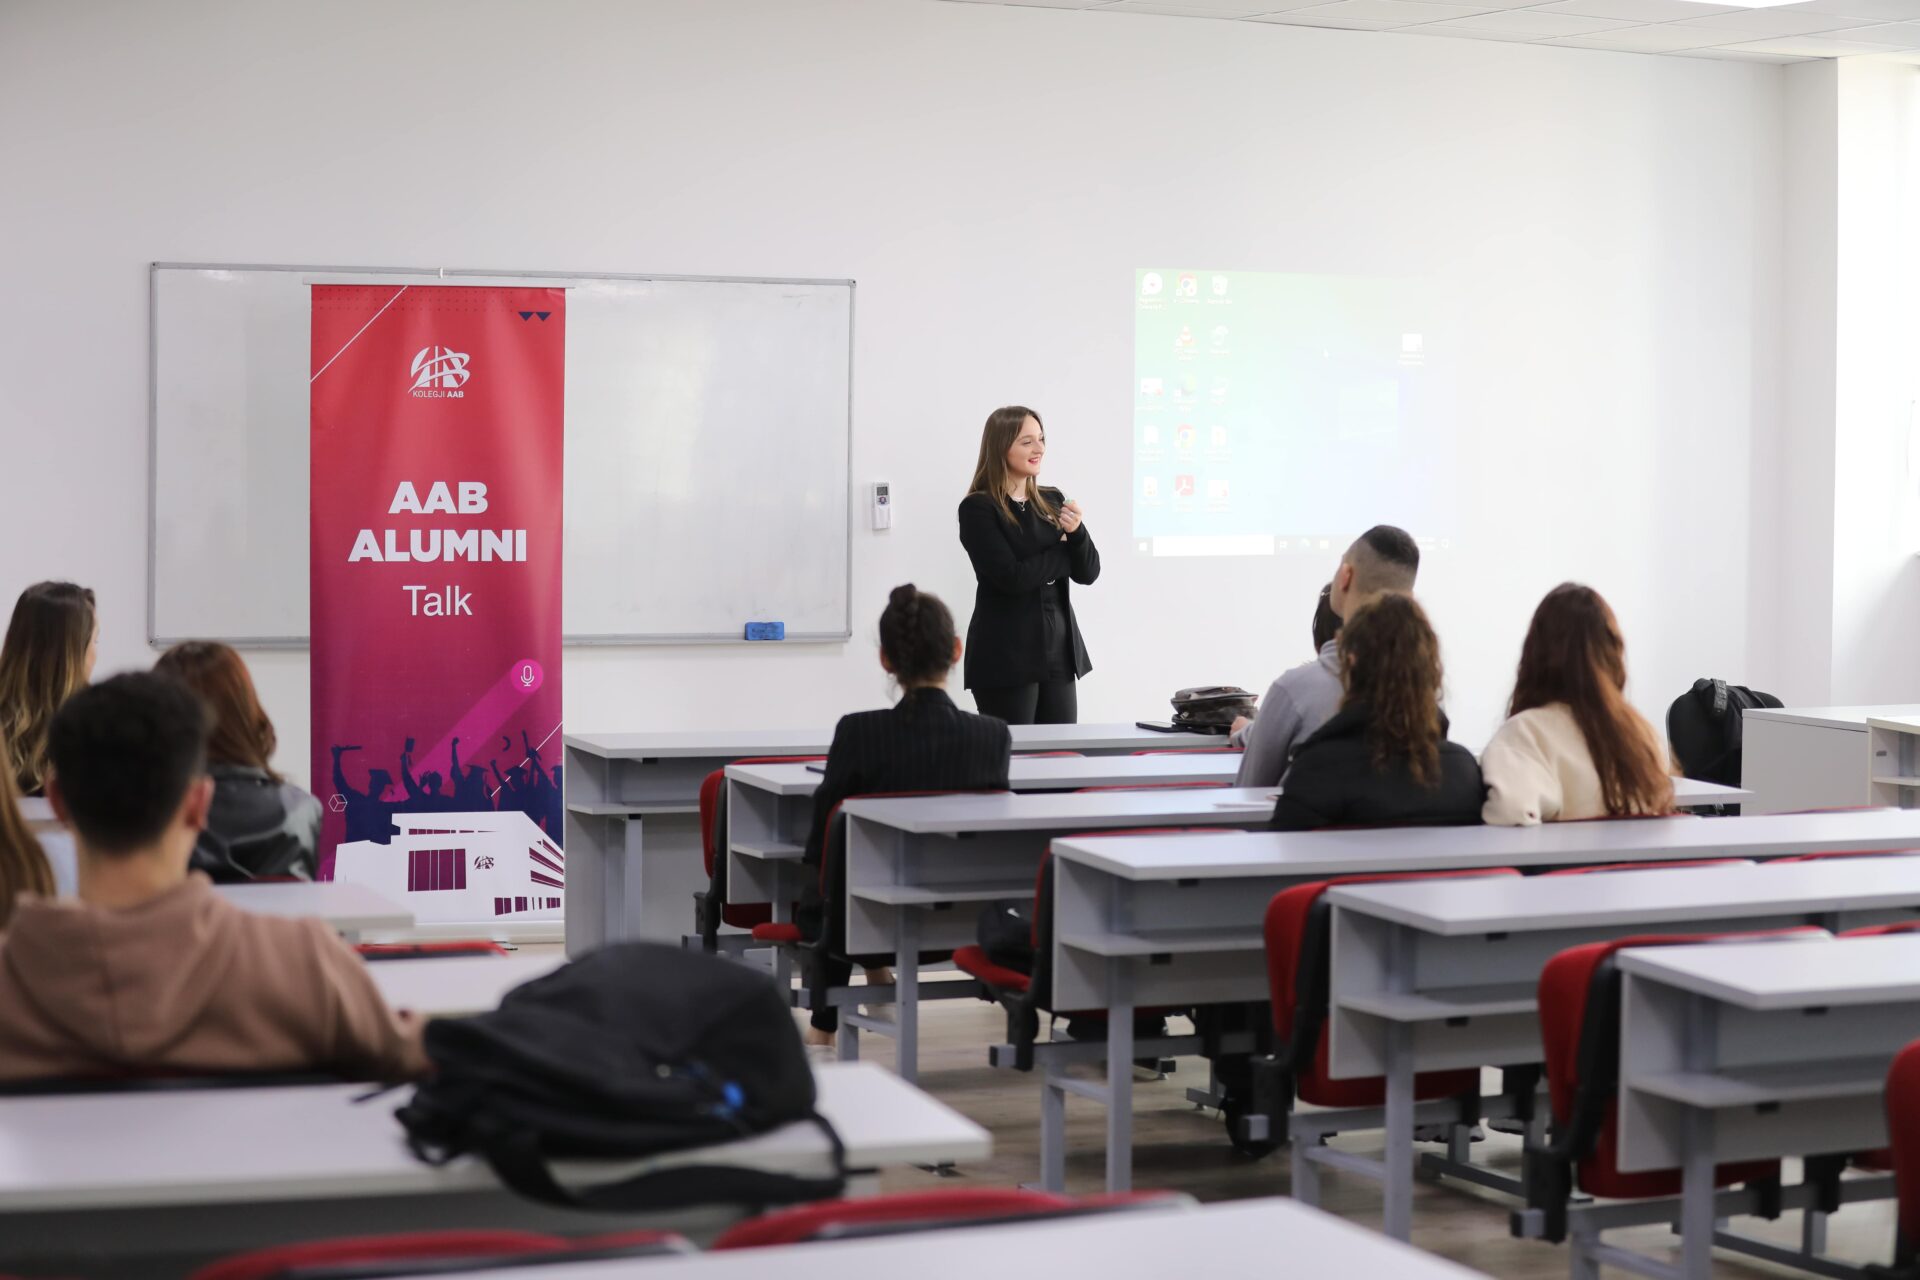 AAB College student shares her story on Alumni Talk, now Communications Officer at the American Chamber of Commerce